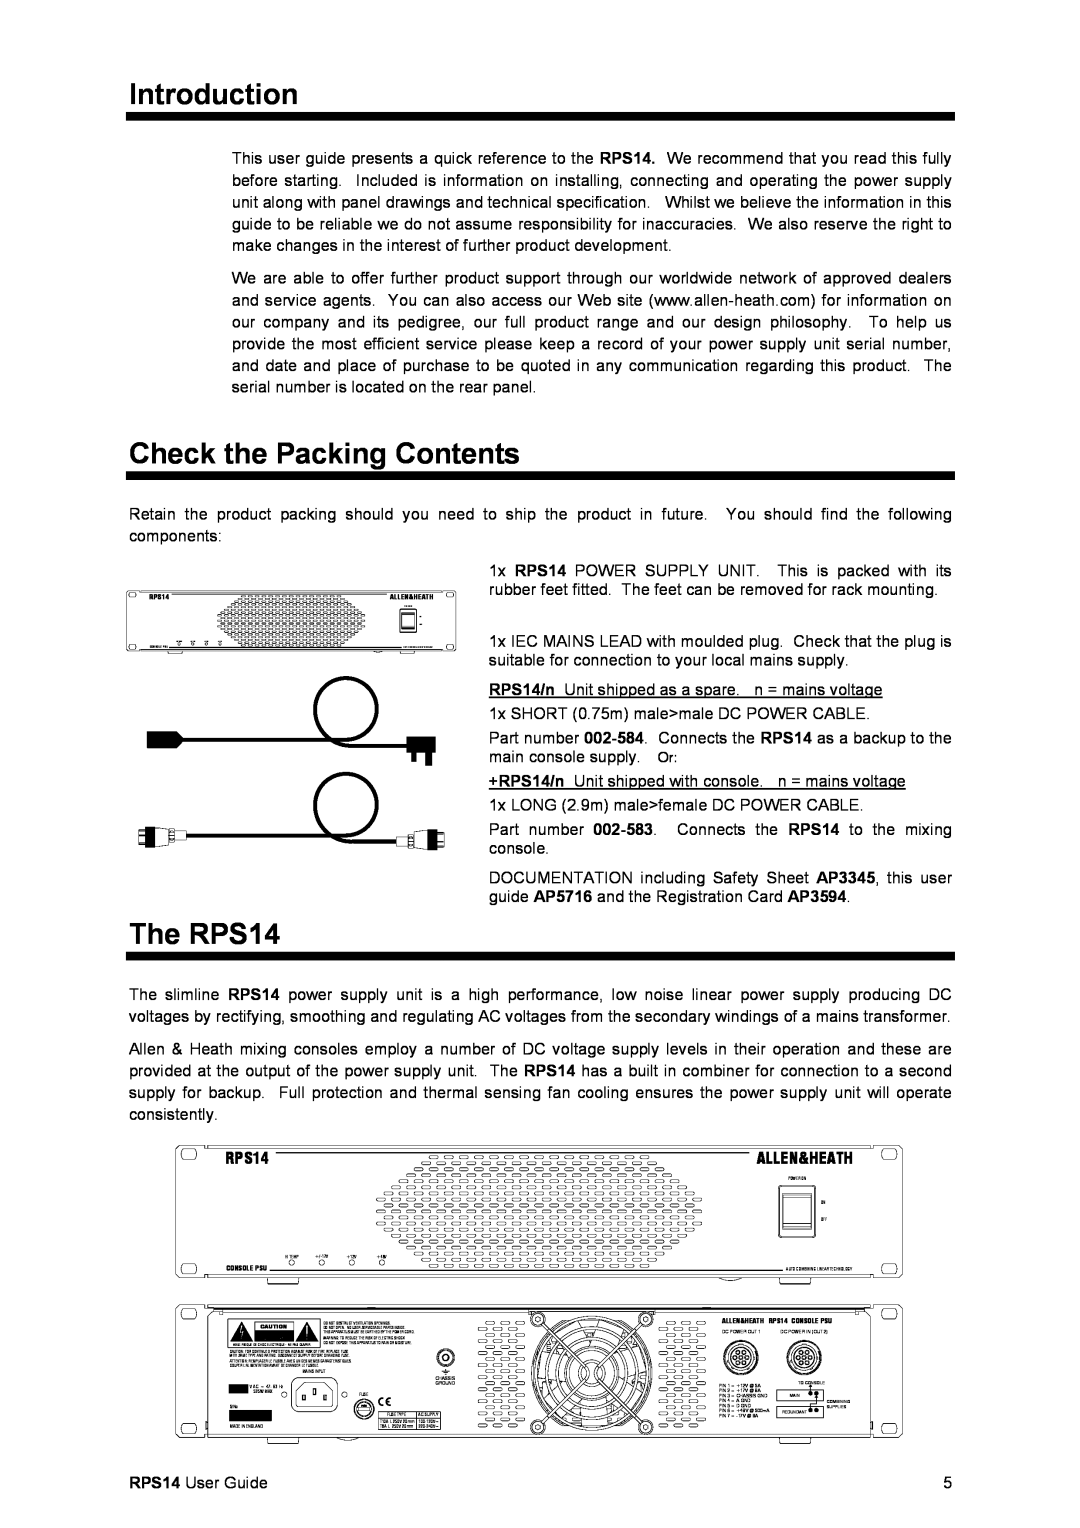 Addlogix manual Introduction, Check the Packing Contents, The RPS14, ALLEN&HEATH RPS14 CONSOLE PSU 